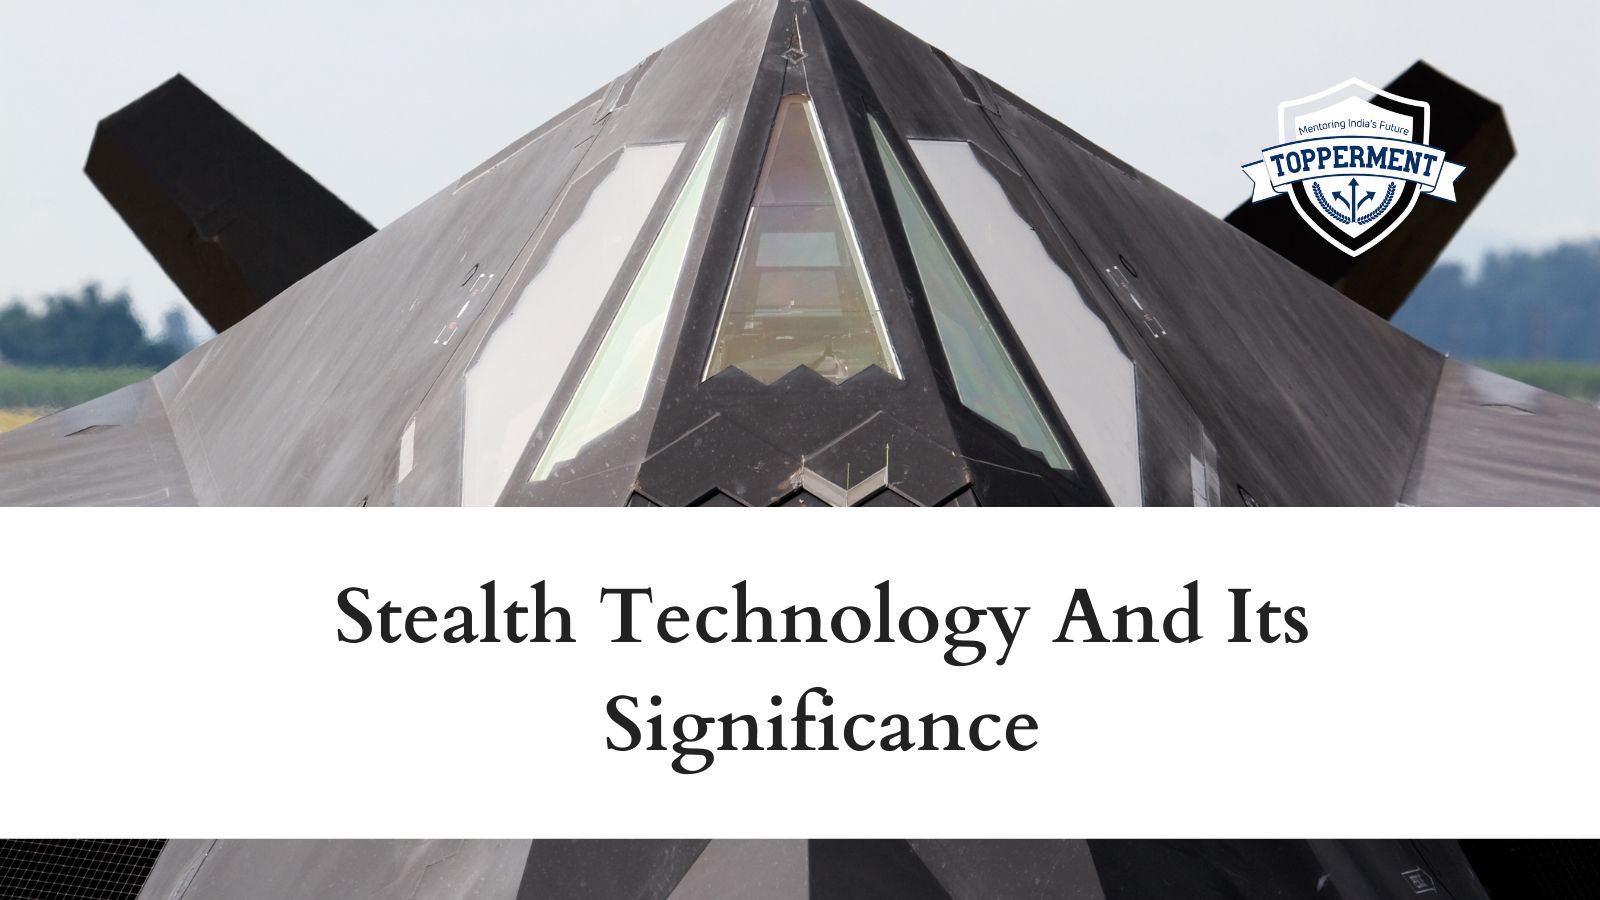 What-Is-Stealth-Technology-And-Its-Significance-Best-UPSC-IAS-Coaching-For-Mentorship-And-Guidance